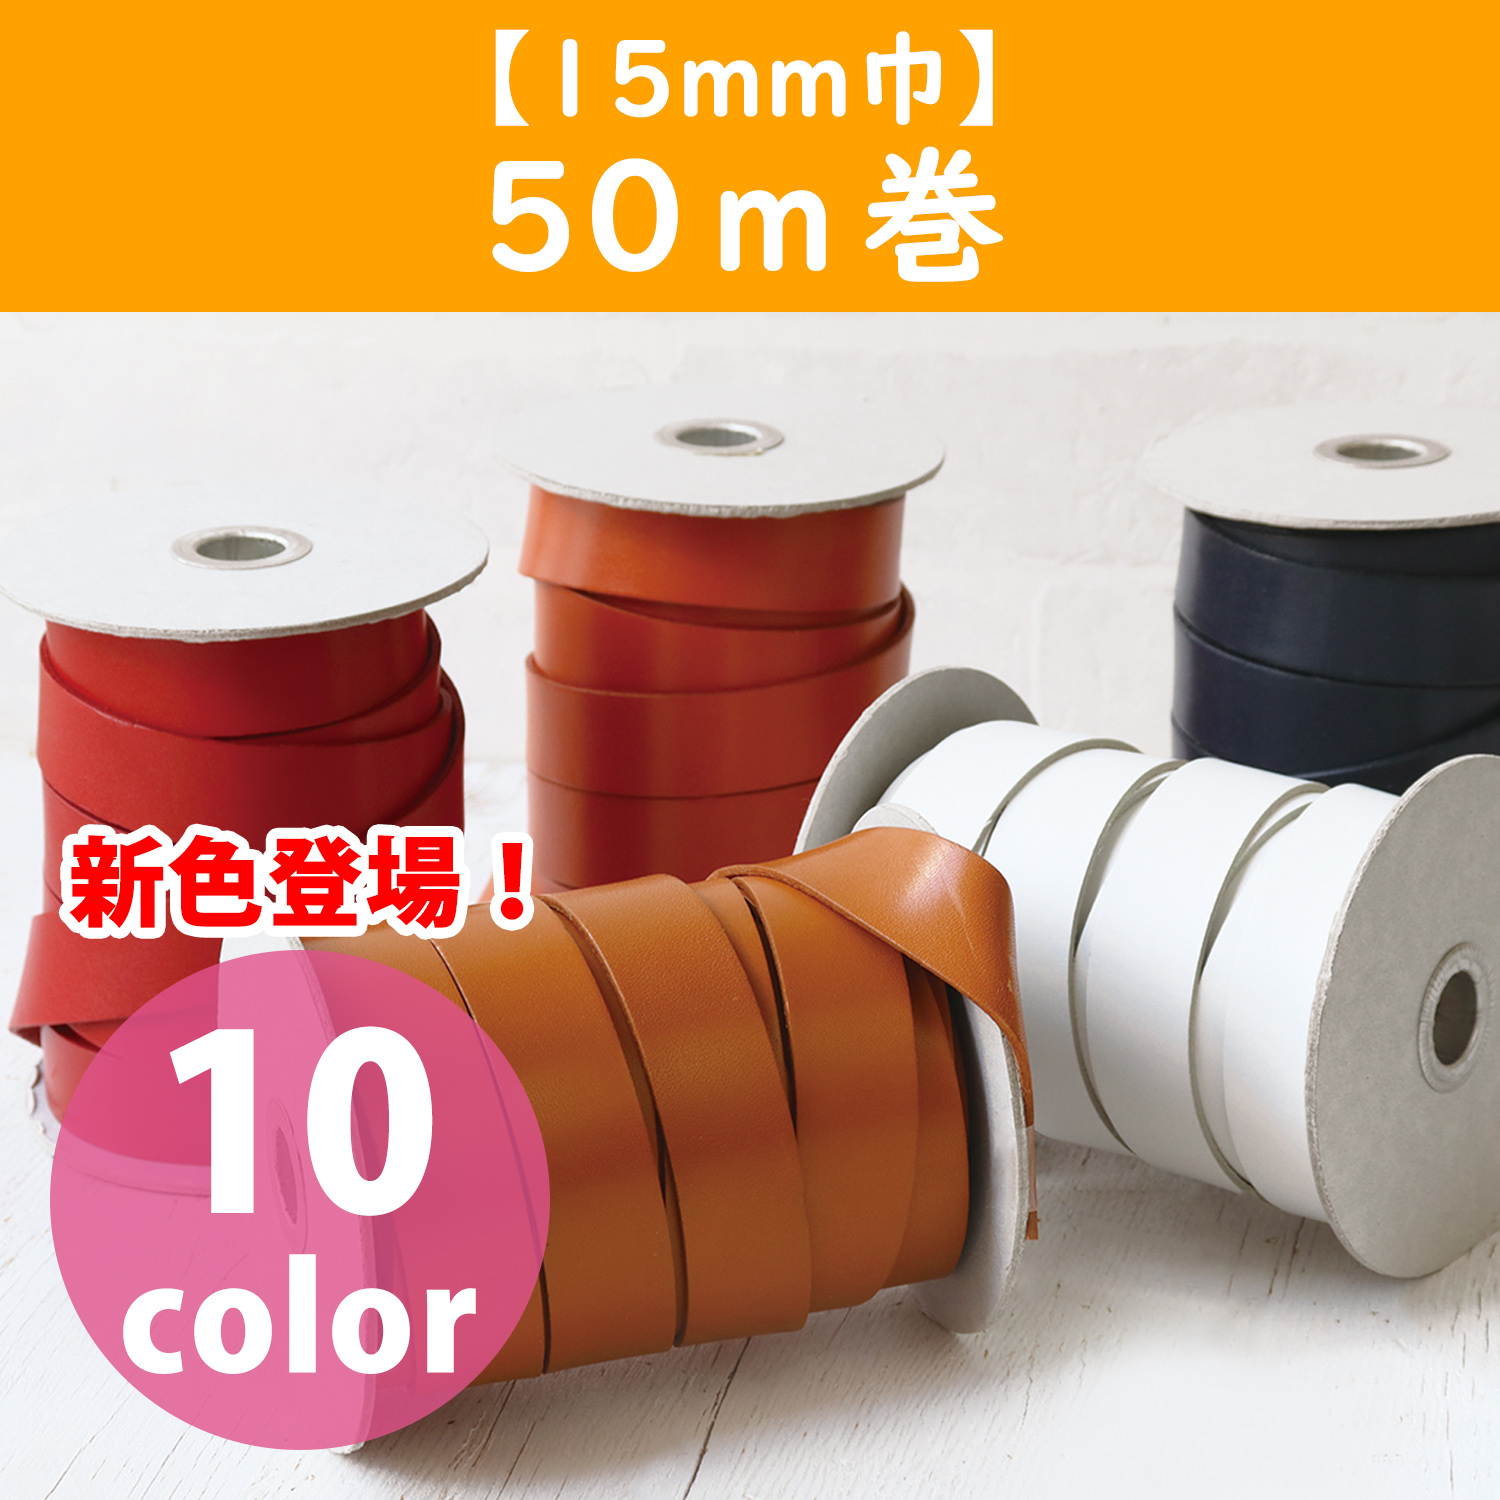 [Order upon demand"", not returnable]MTLS1015 Tanned Cow Hide Tape 15mm wide 50m (roll)